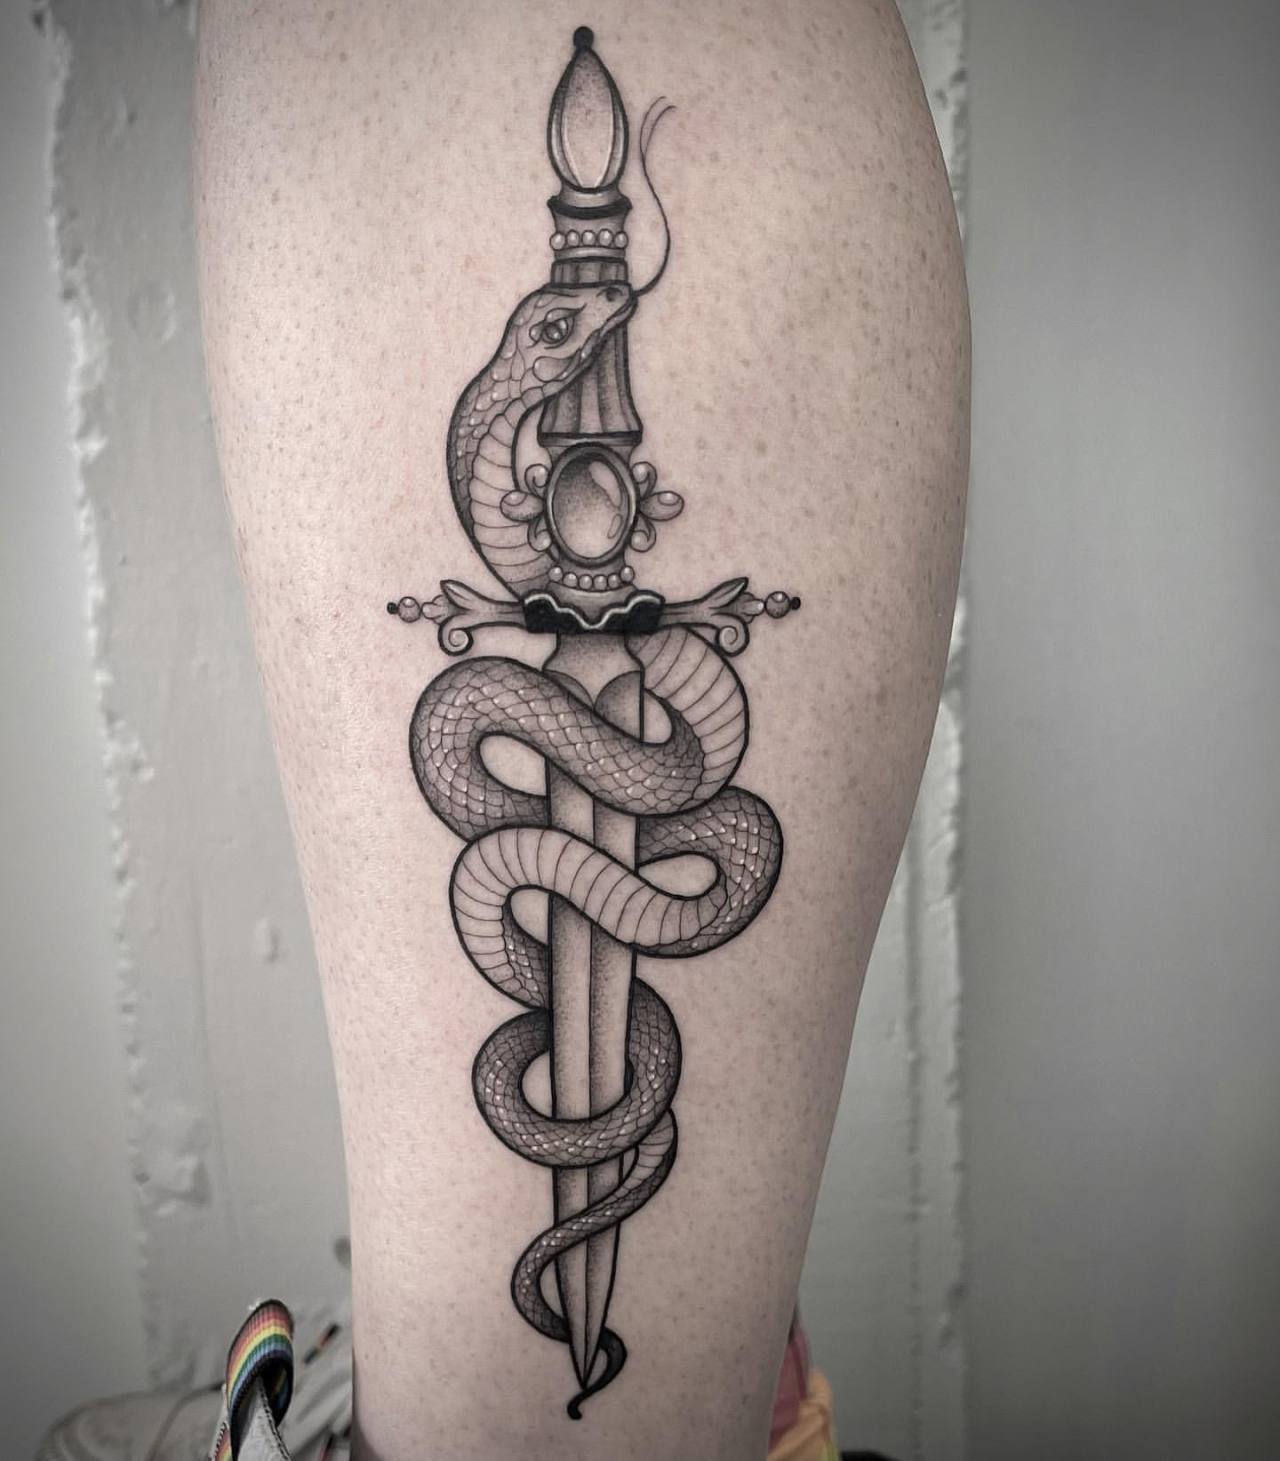 Dagger and Snake Tattoo Meaning: Exploring the Rich Meanings Infused into Body Ink